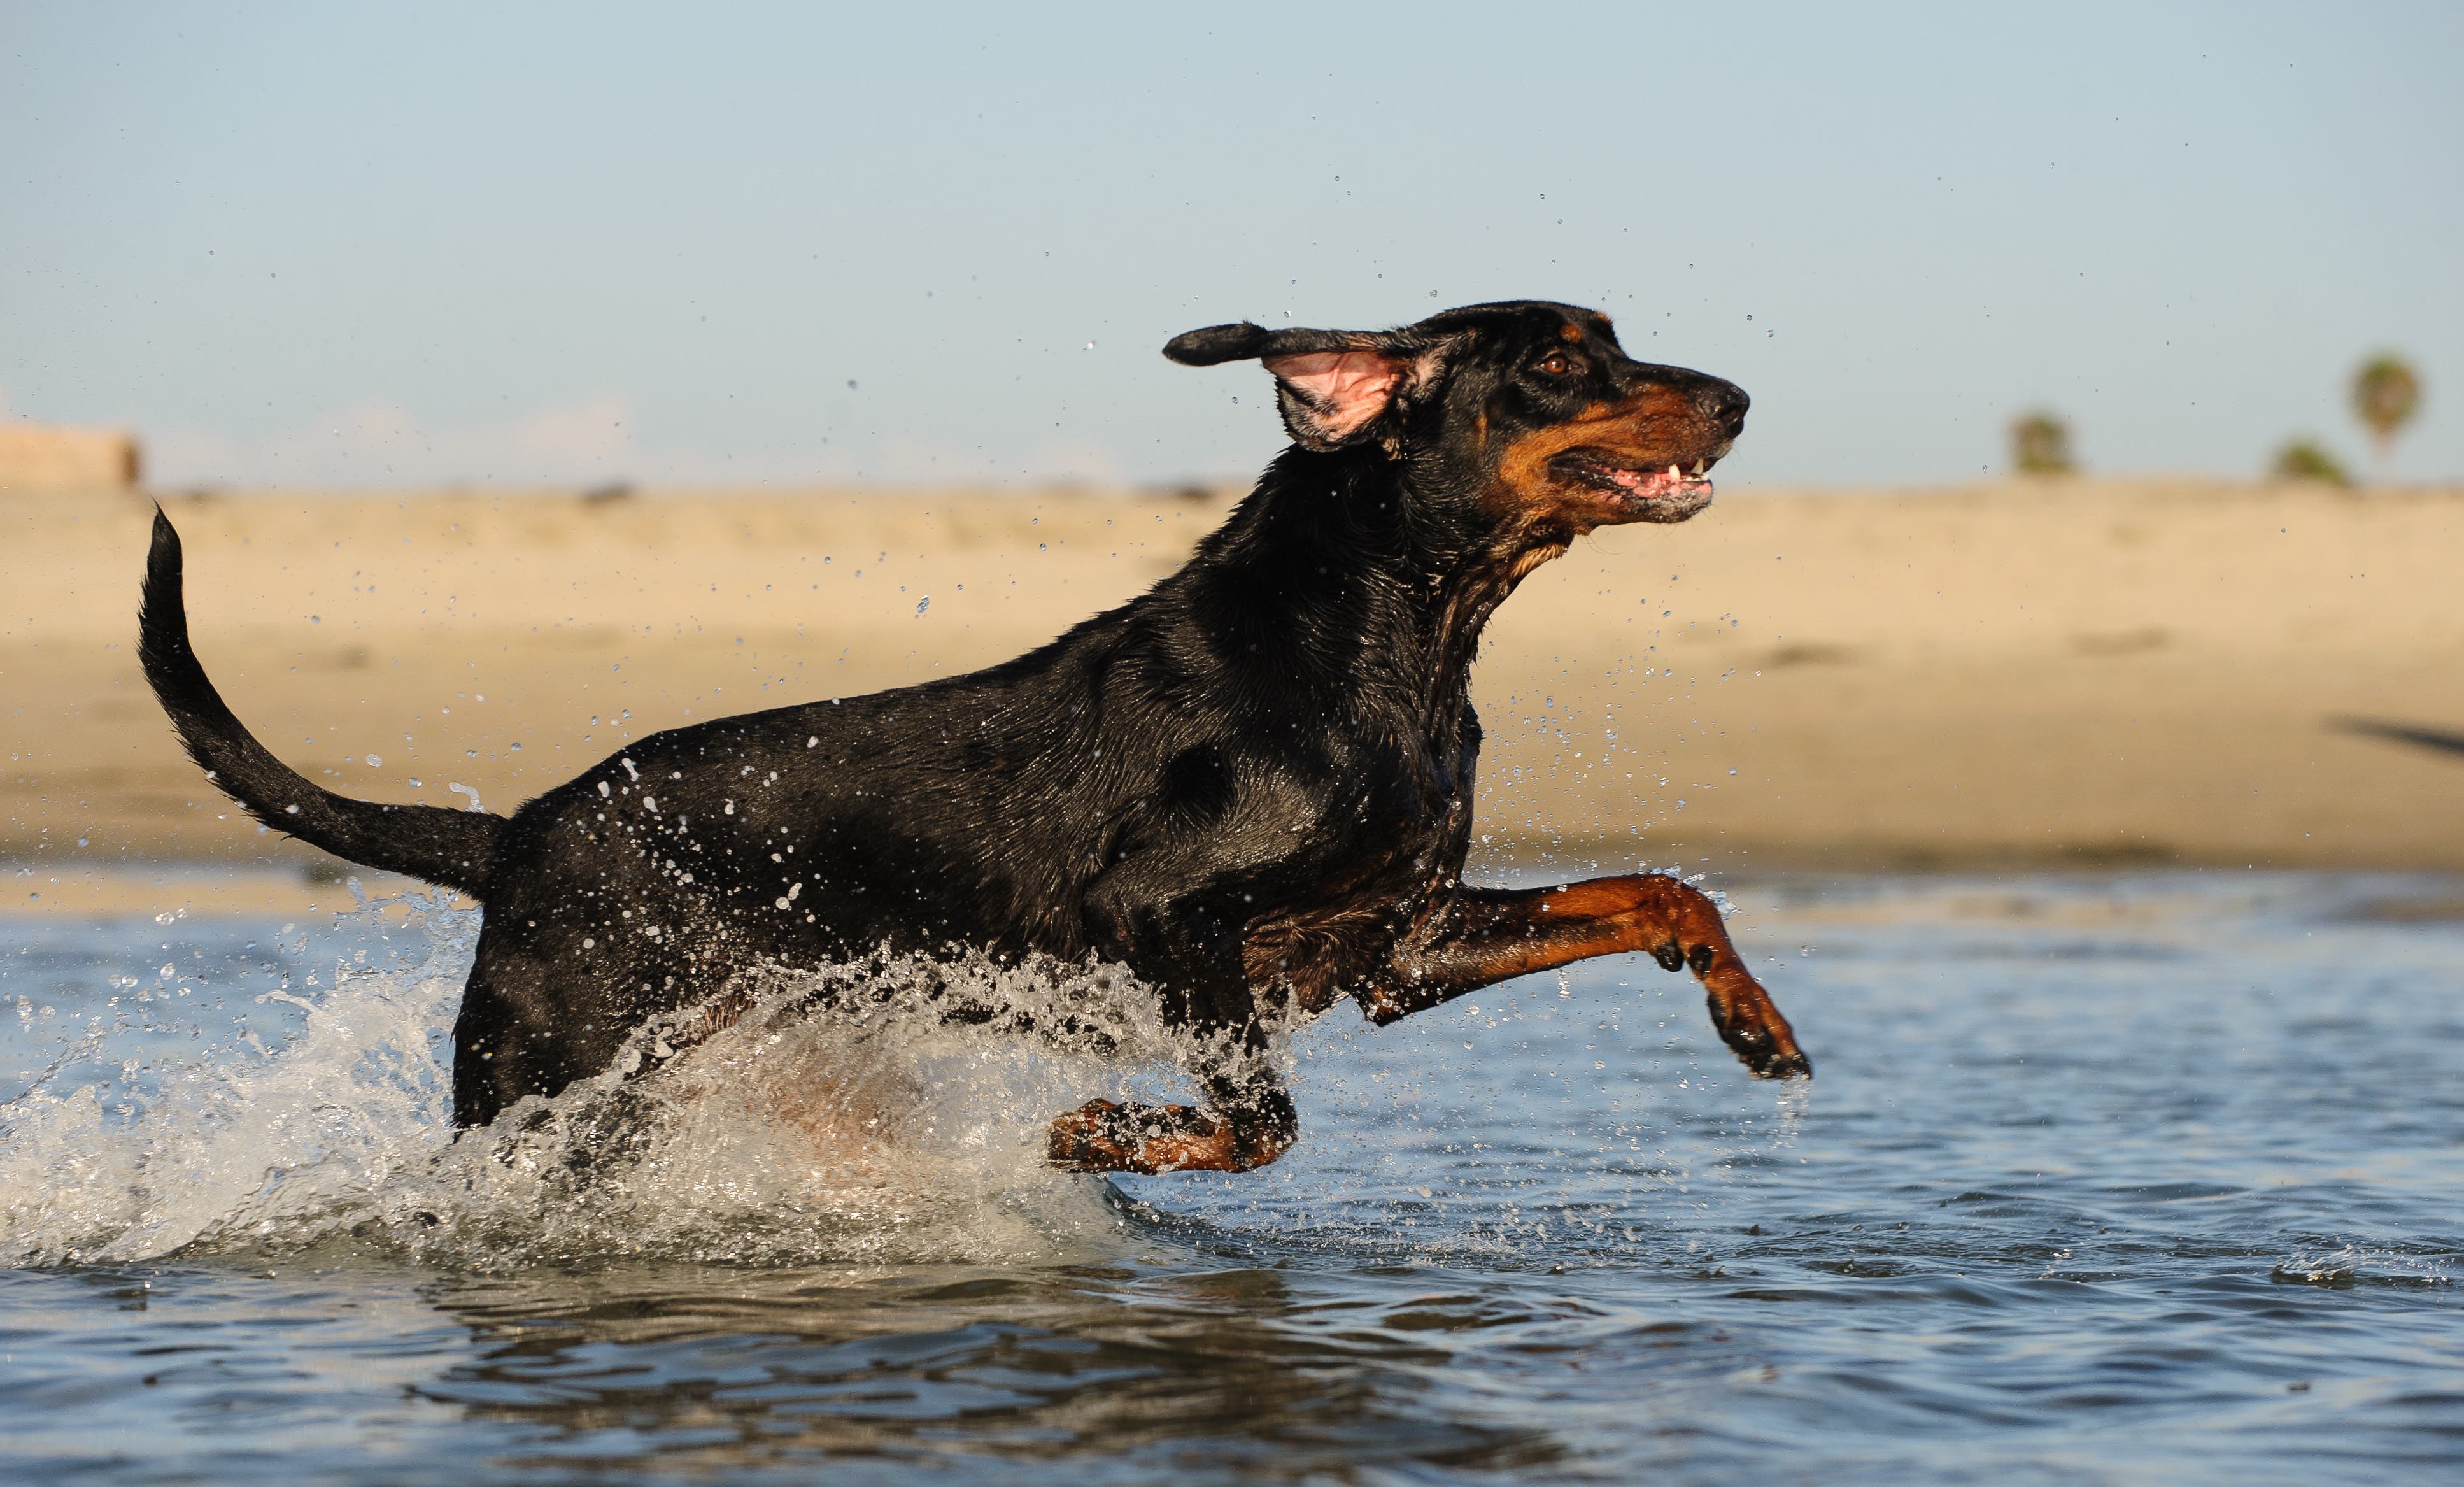 black and tan coonhound splashing in water at a beach